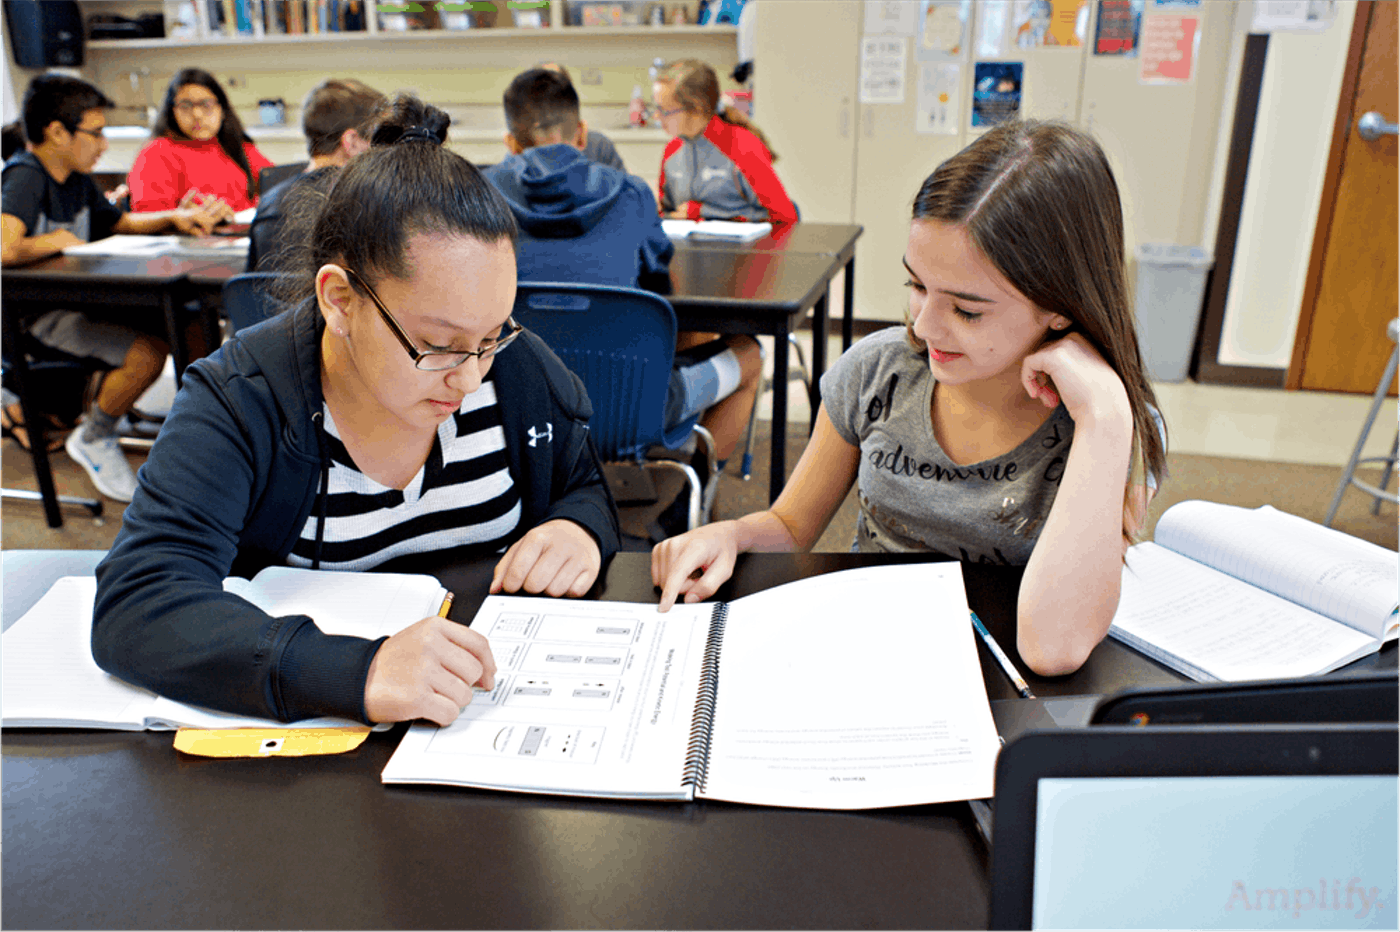 Two students, one asian and one caucasian, study together in a classroom filled with peers.